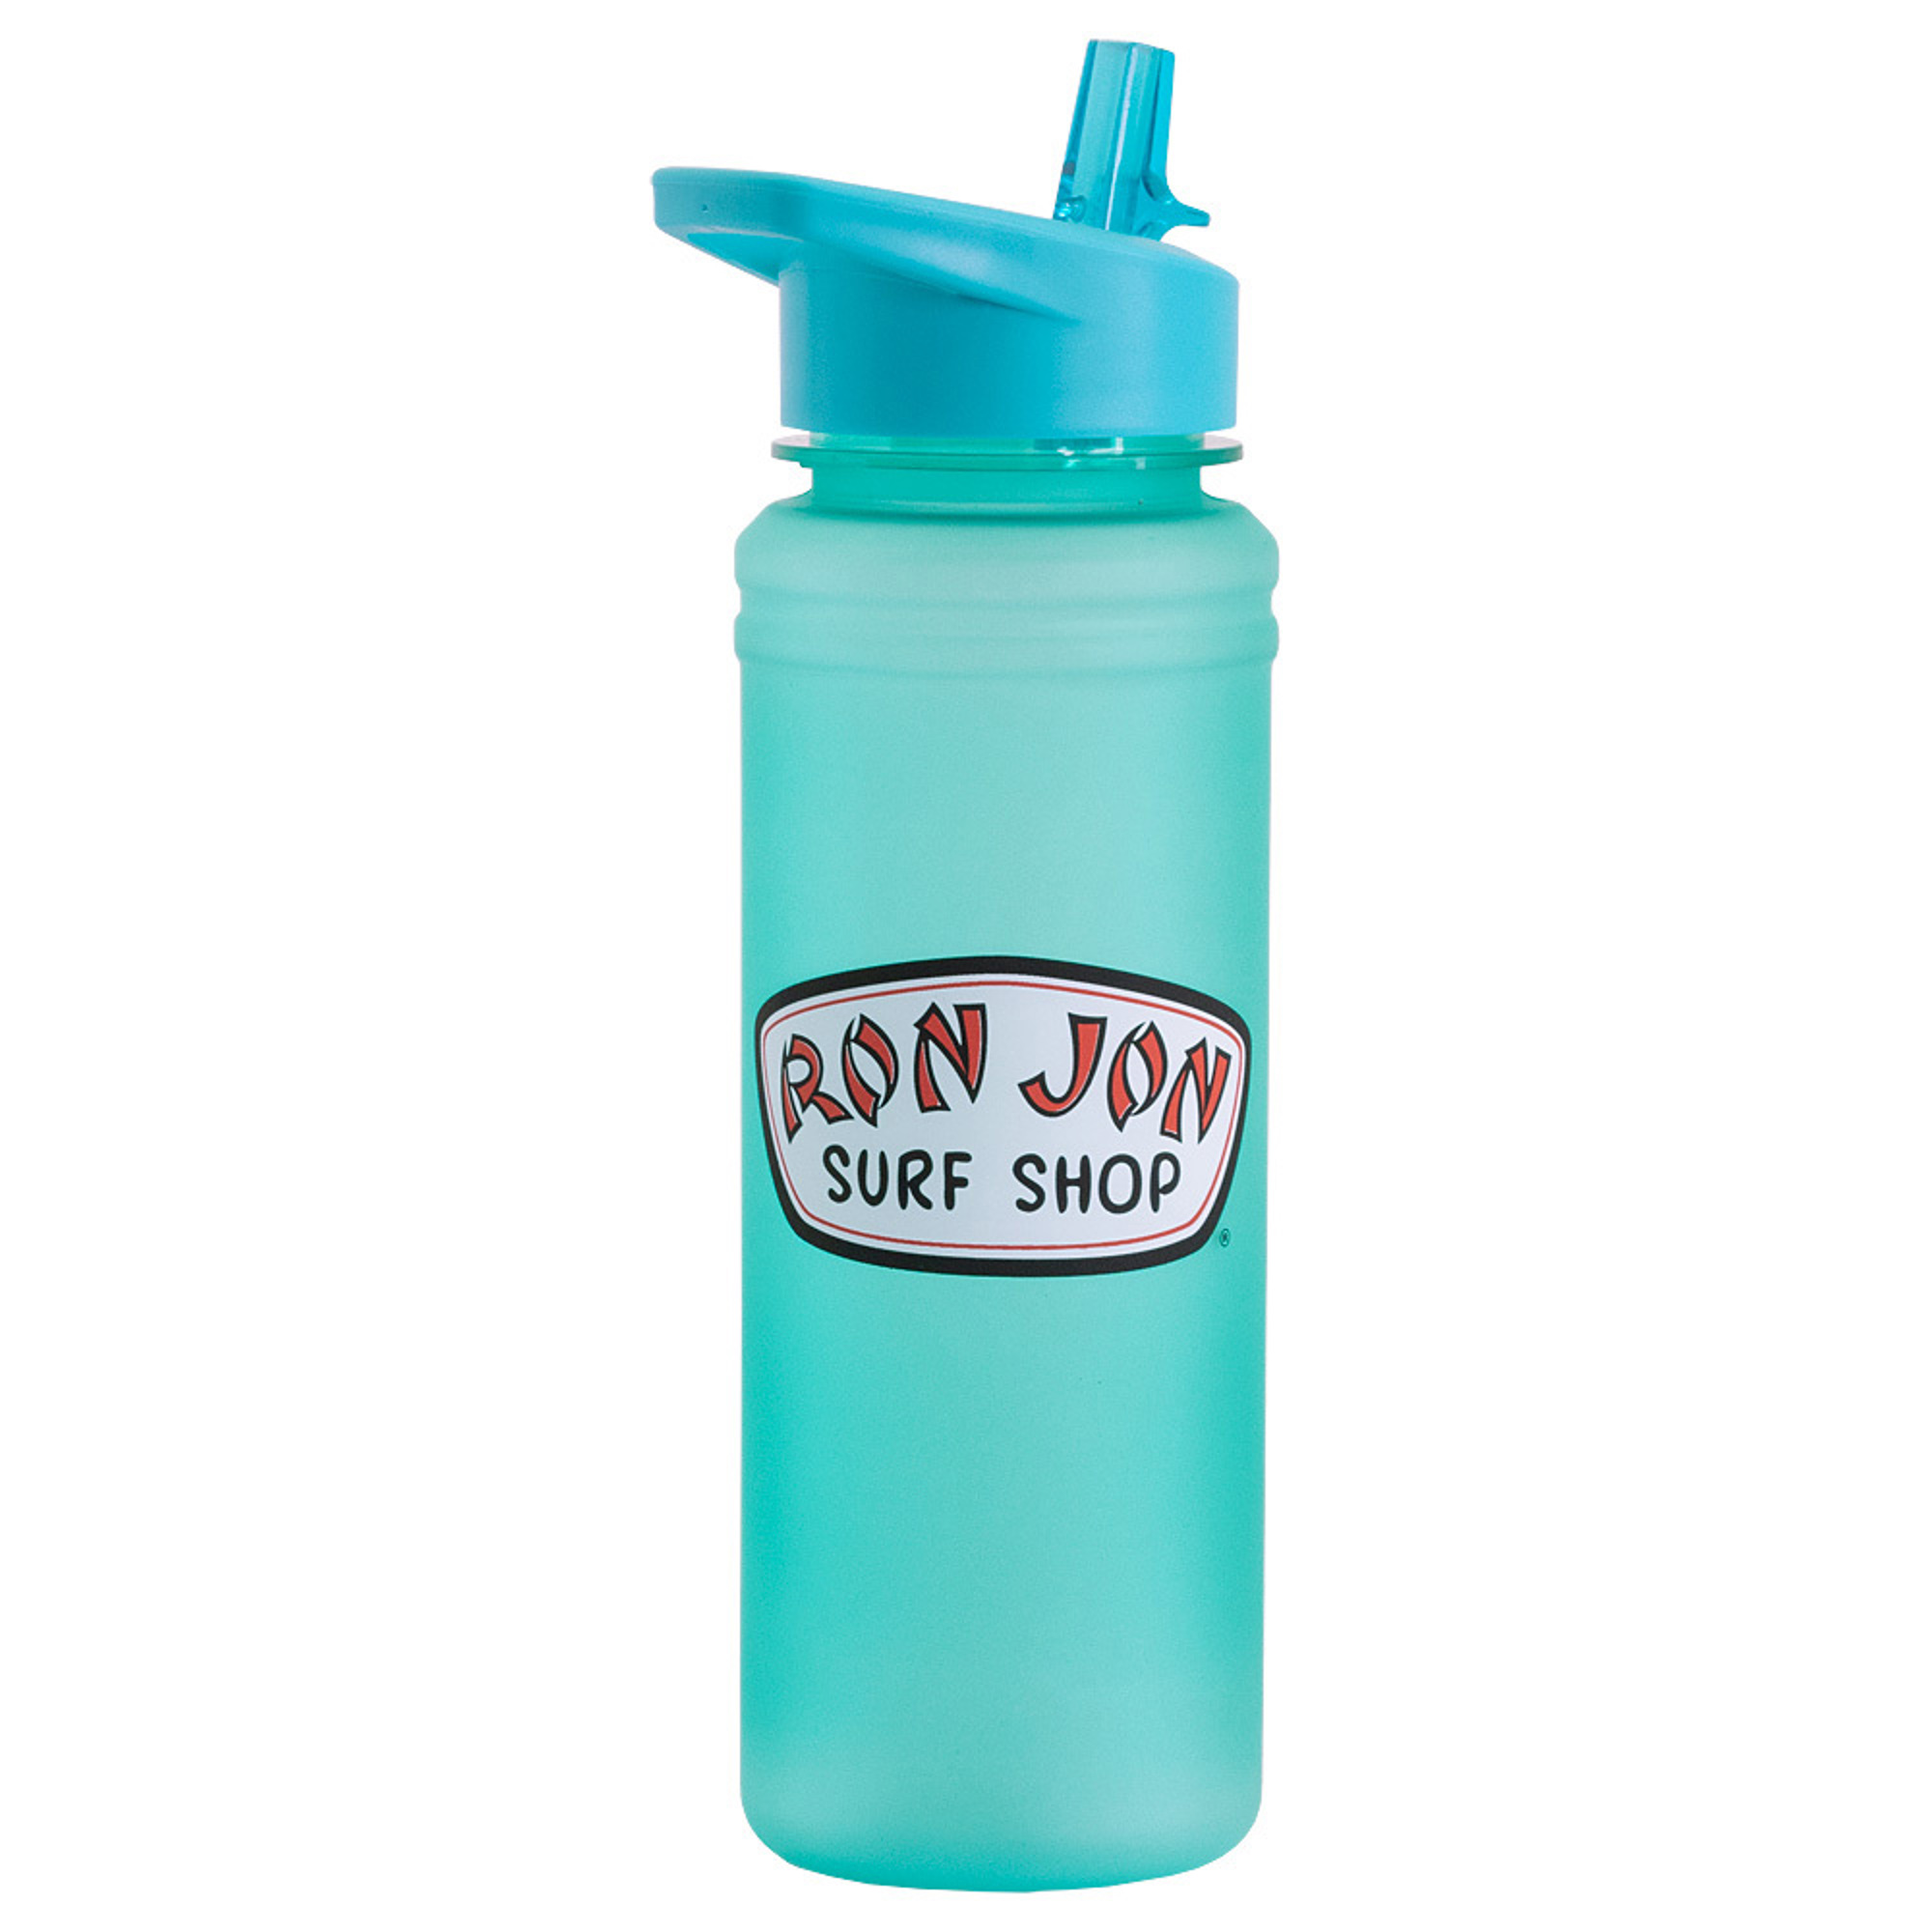 https://www.ronjonsurfshop.com/assets/09/ab/09ab8121-ee8c-451f-9b1f-cba8bf5ed085/d2000x2000-10820658000-ron-jon-teal-frosted-water-bottle-front.jpg